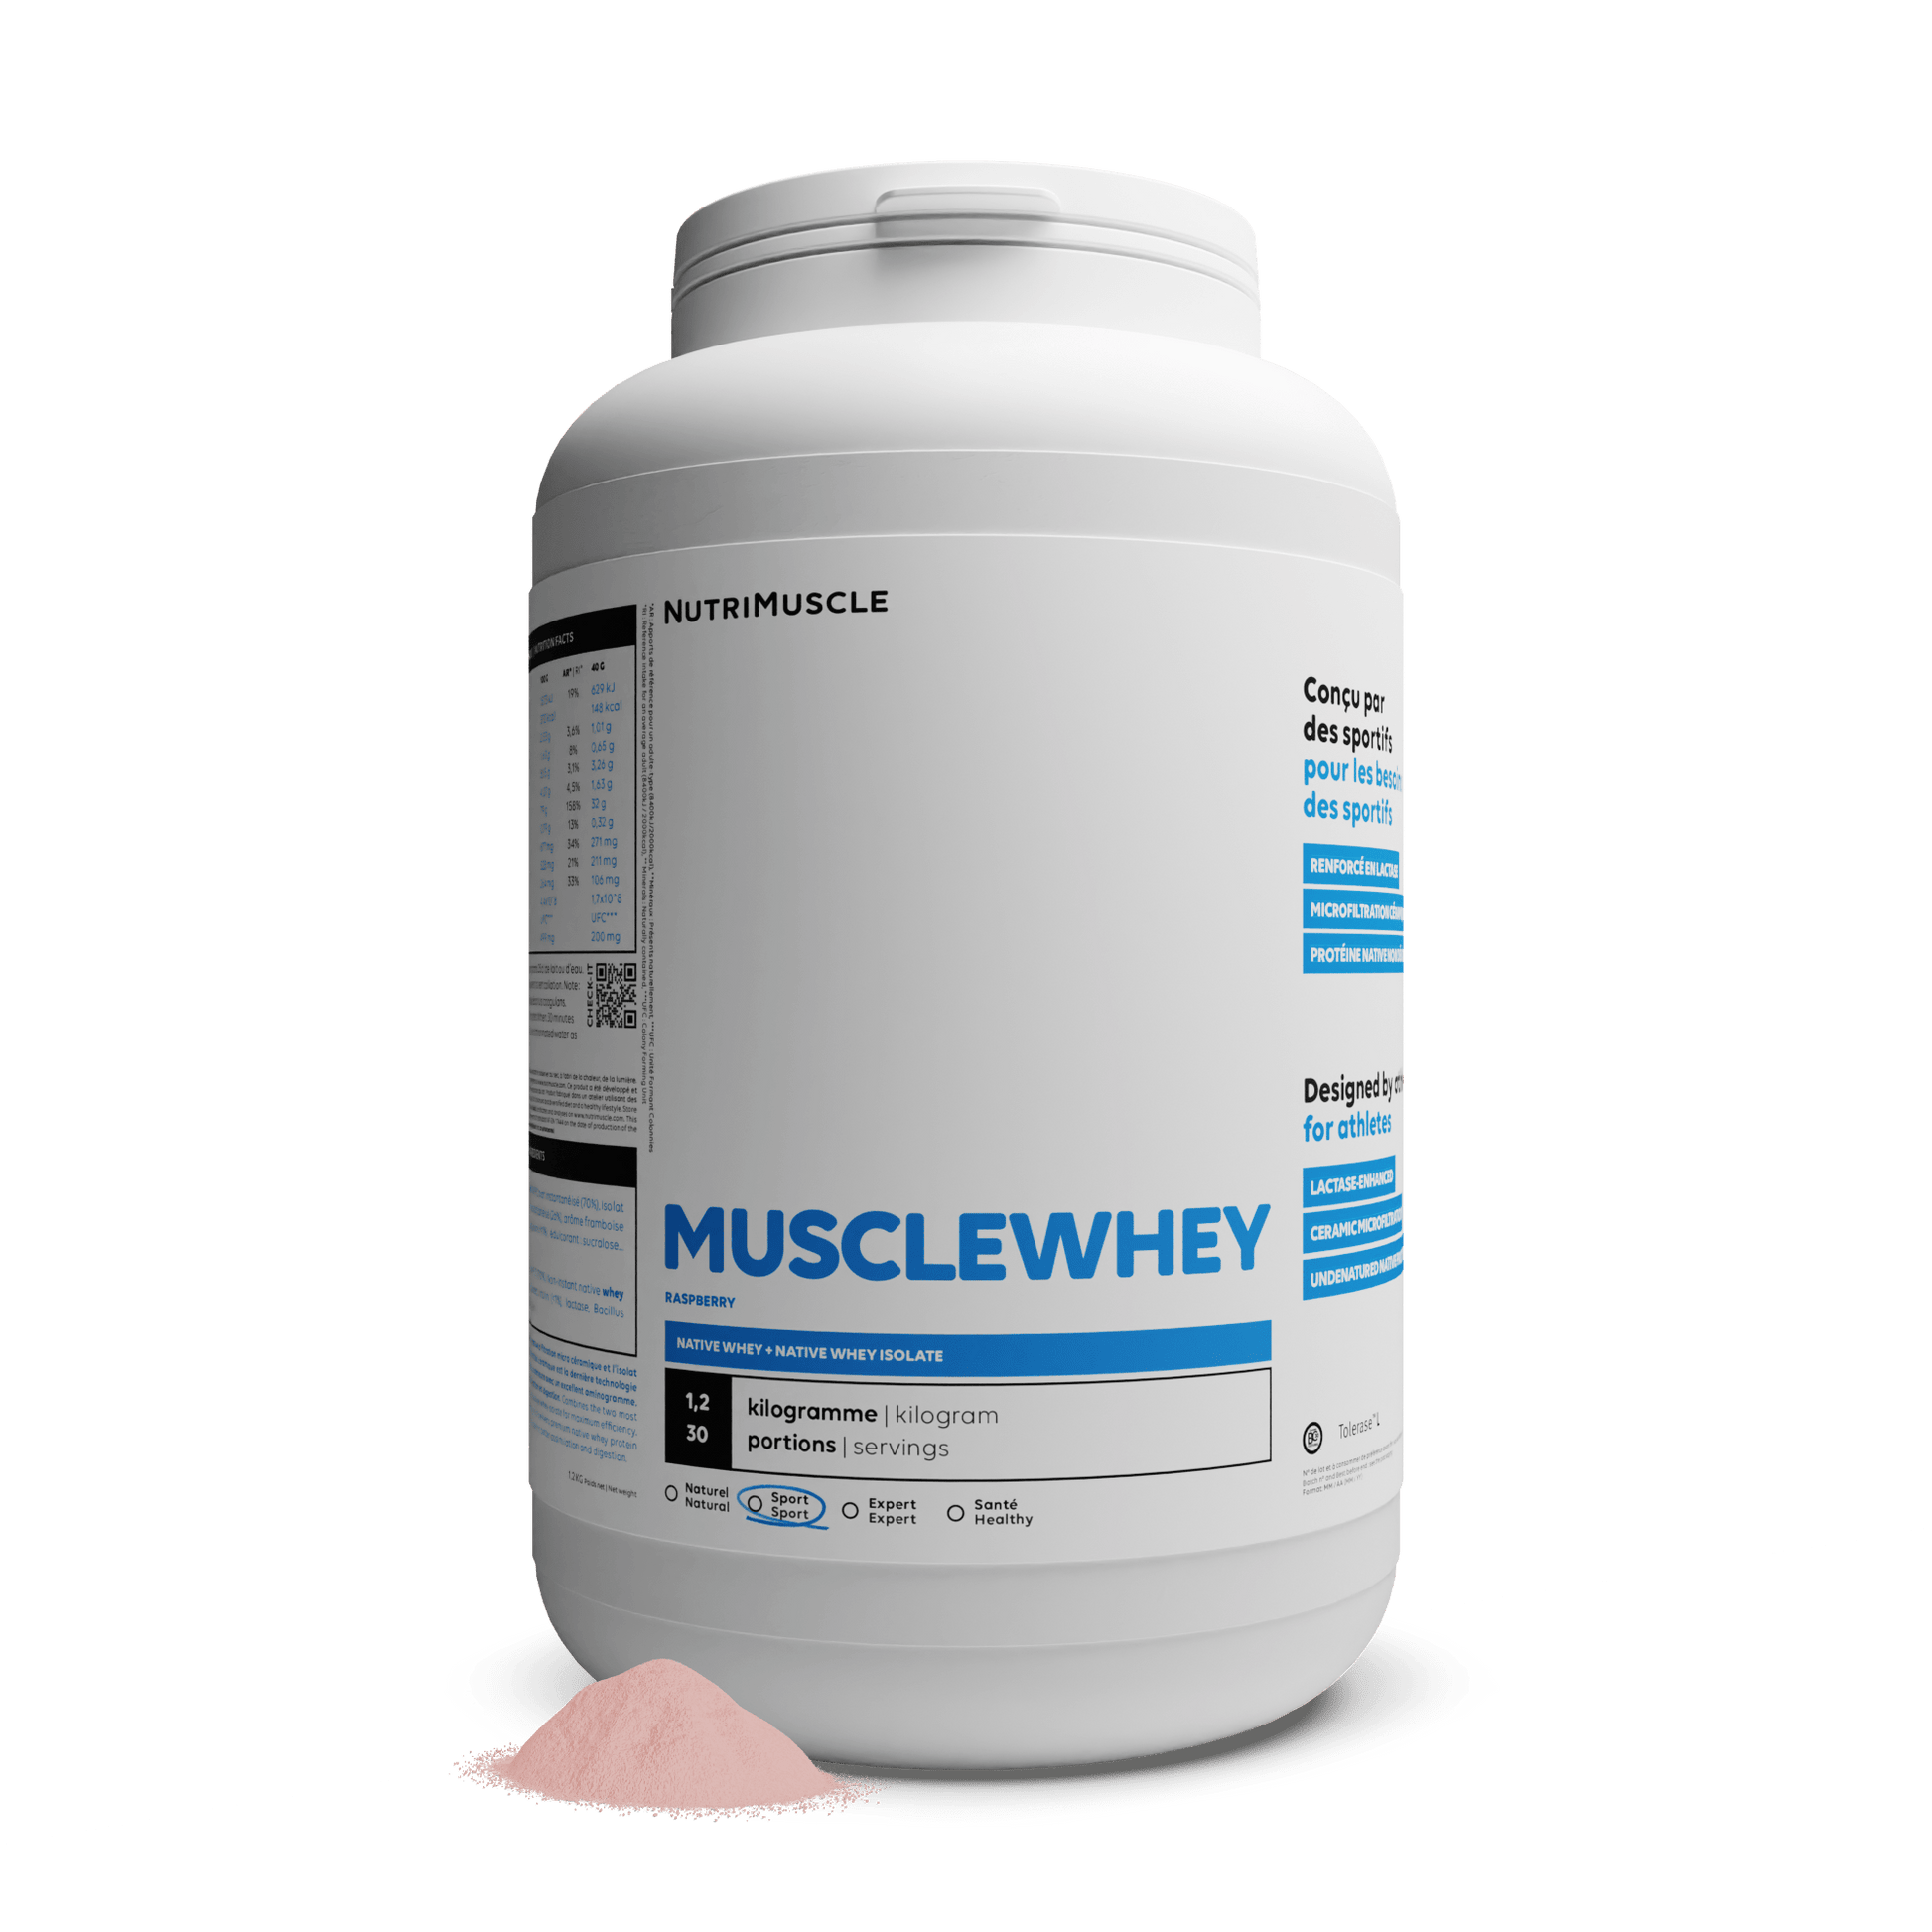 Nutrimuscle Protéines Framboise / 1.20 kg Musclewhey - Mix Protein